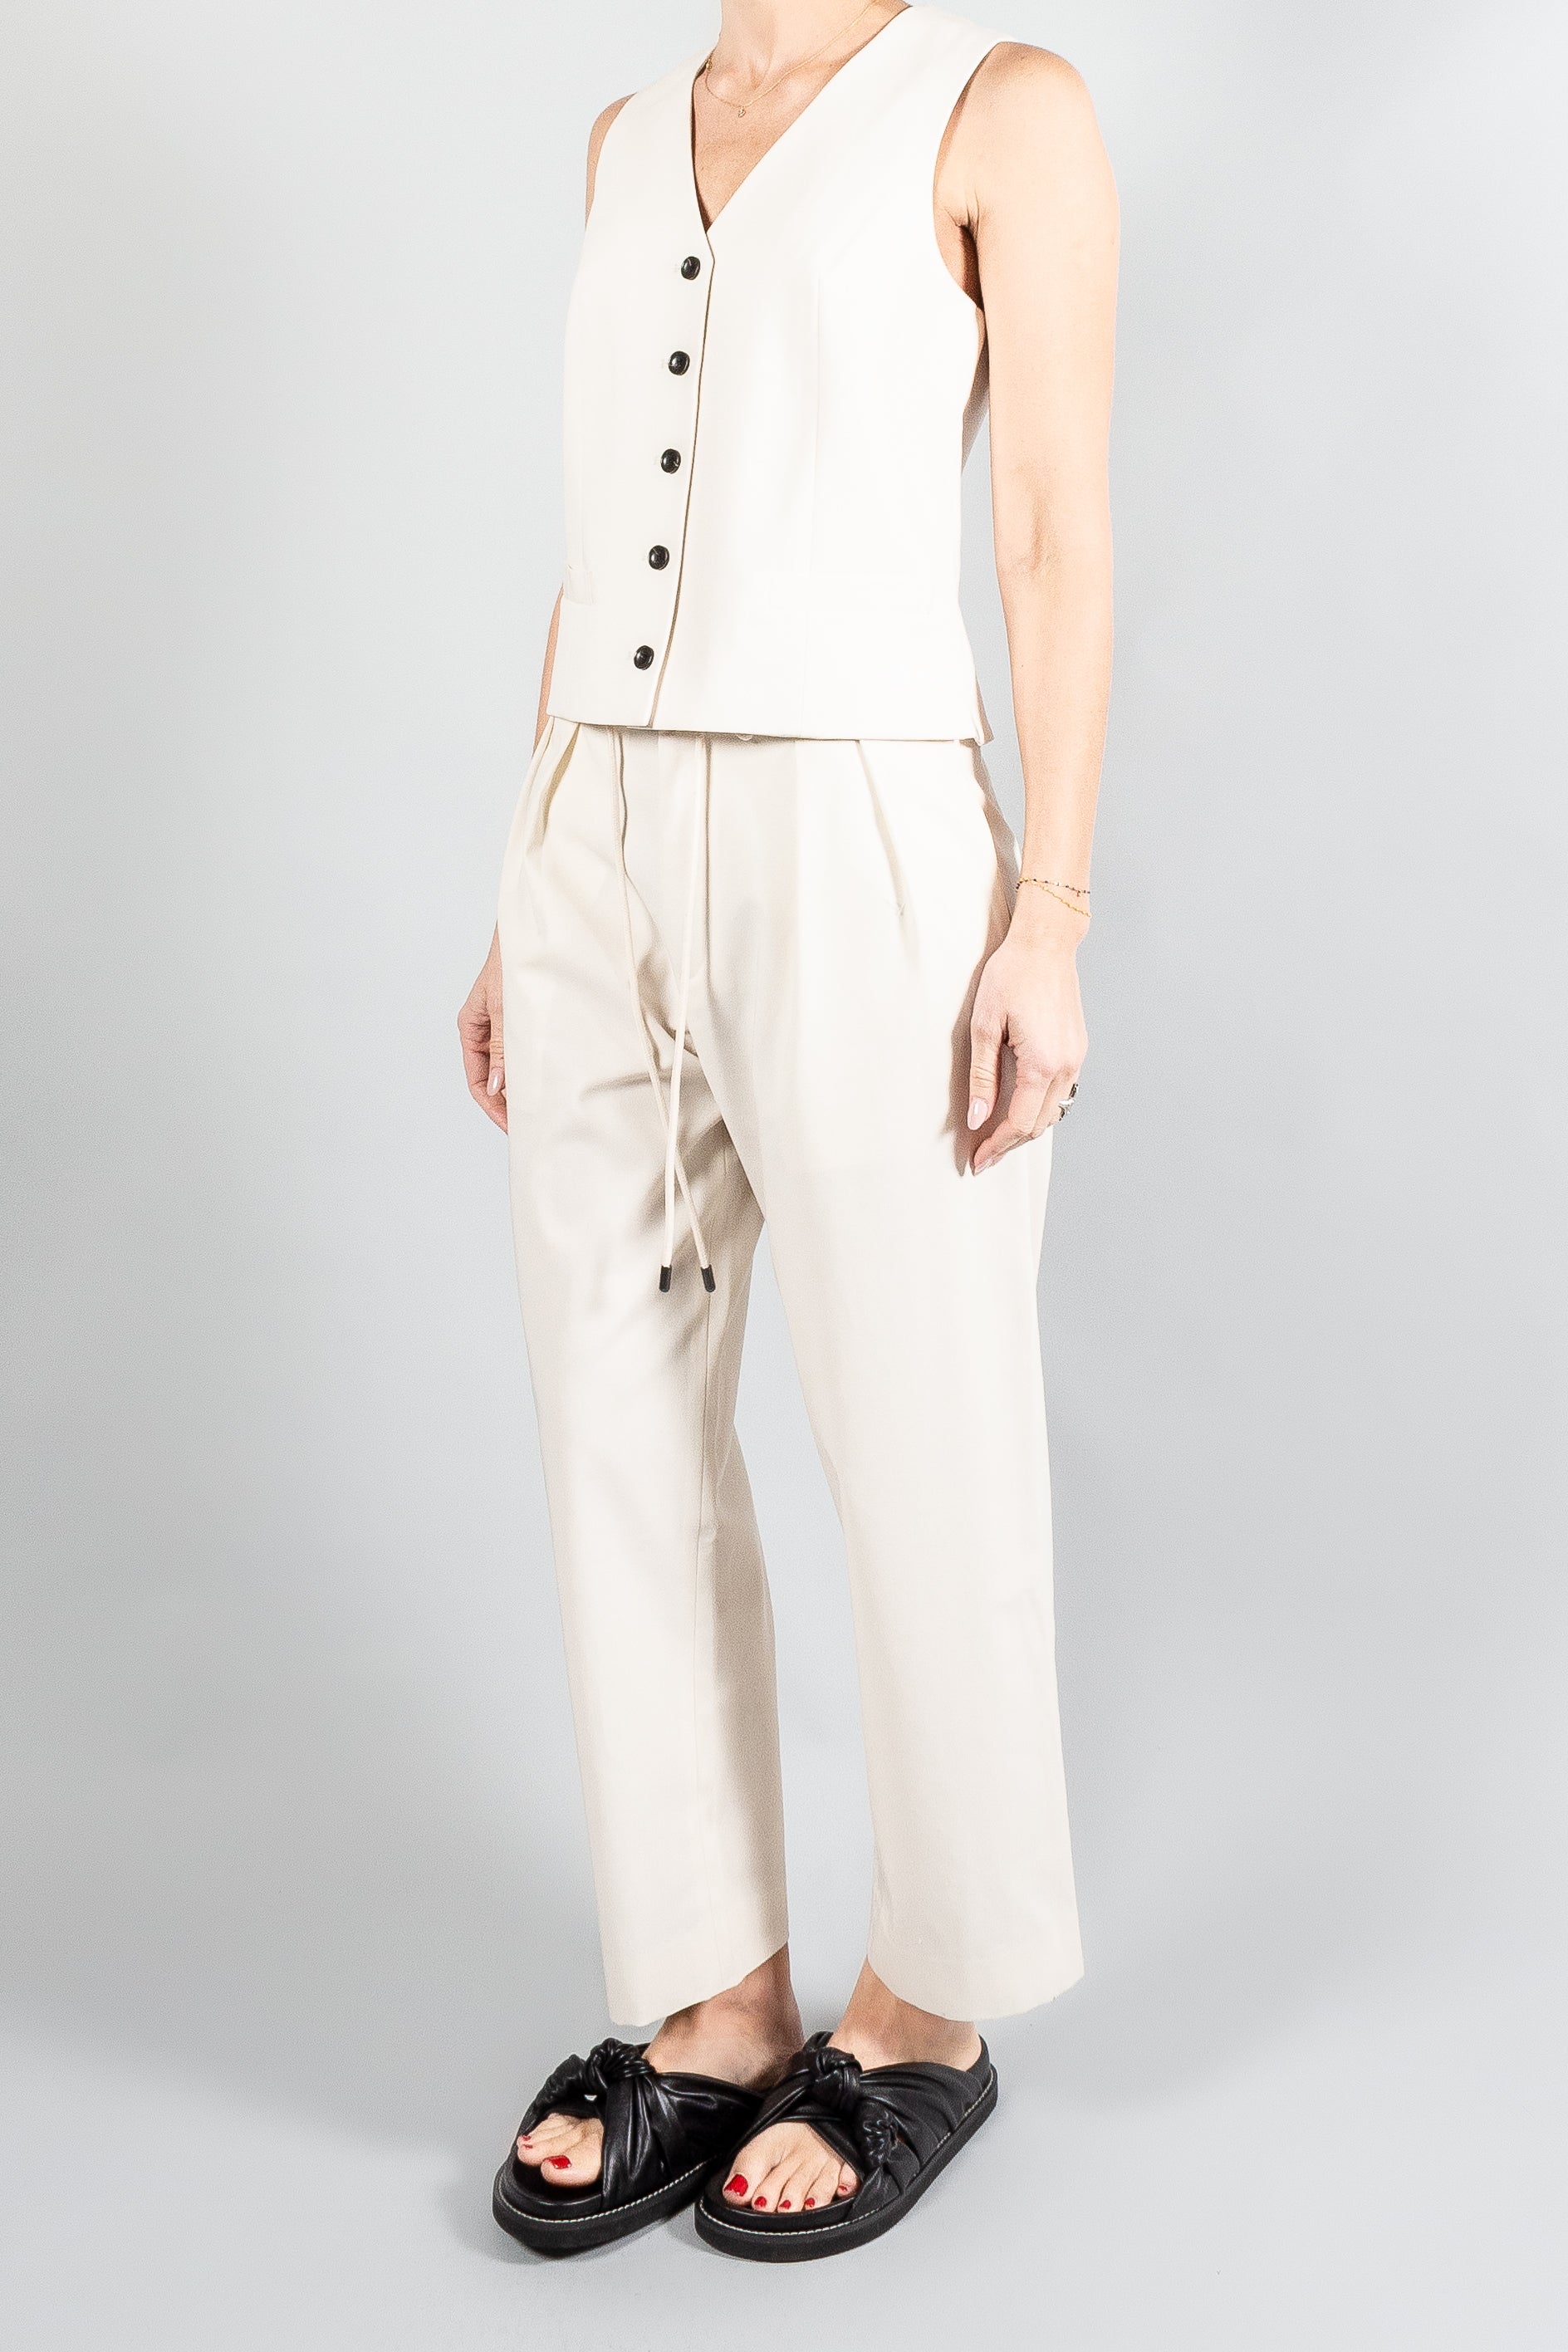 Maria Mcmanus Pleat Front Drawstring Trouser-Pants and Shorts-Misch-Boutique-Vancouver-Canada-misch.ca